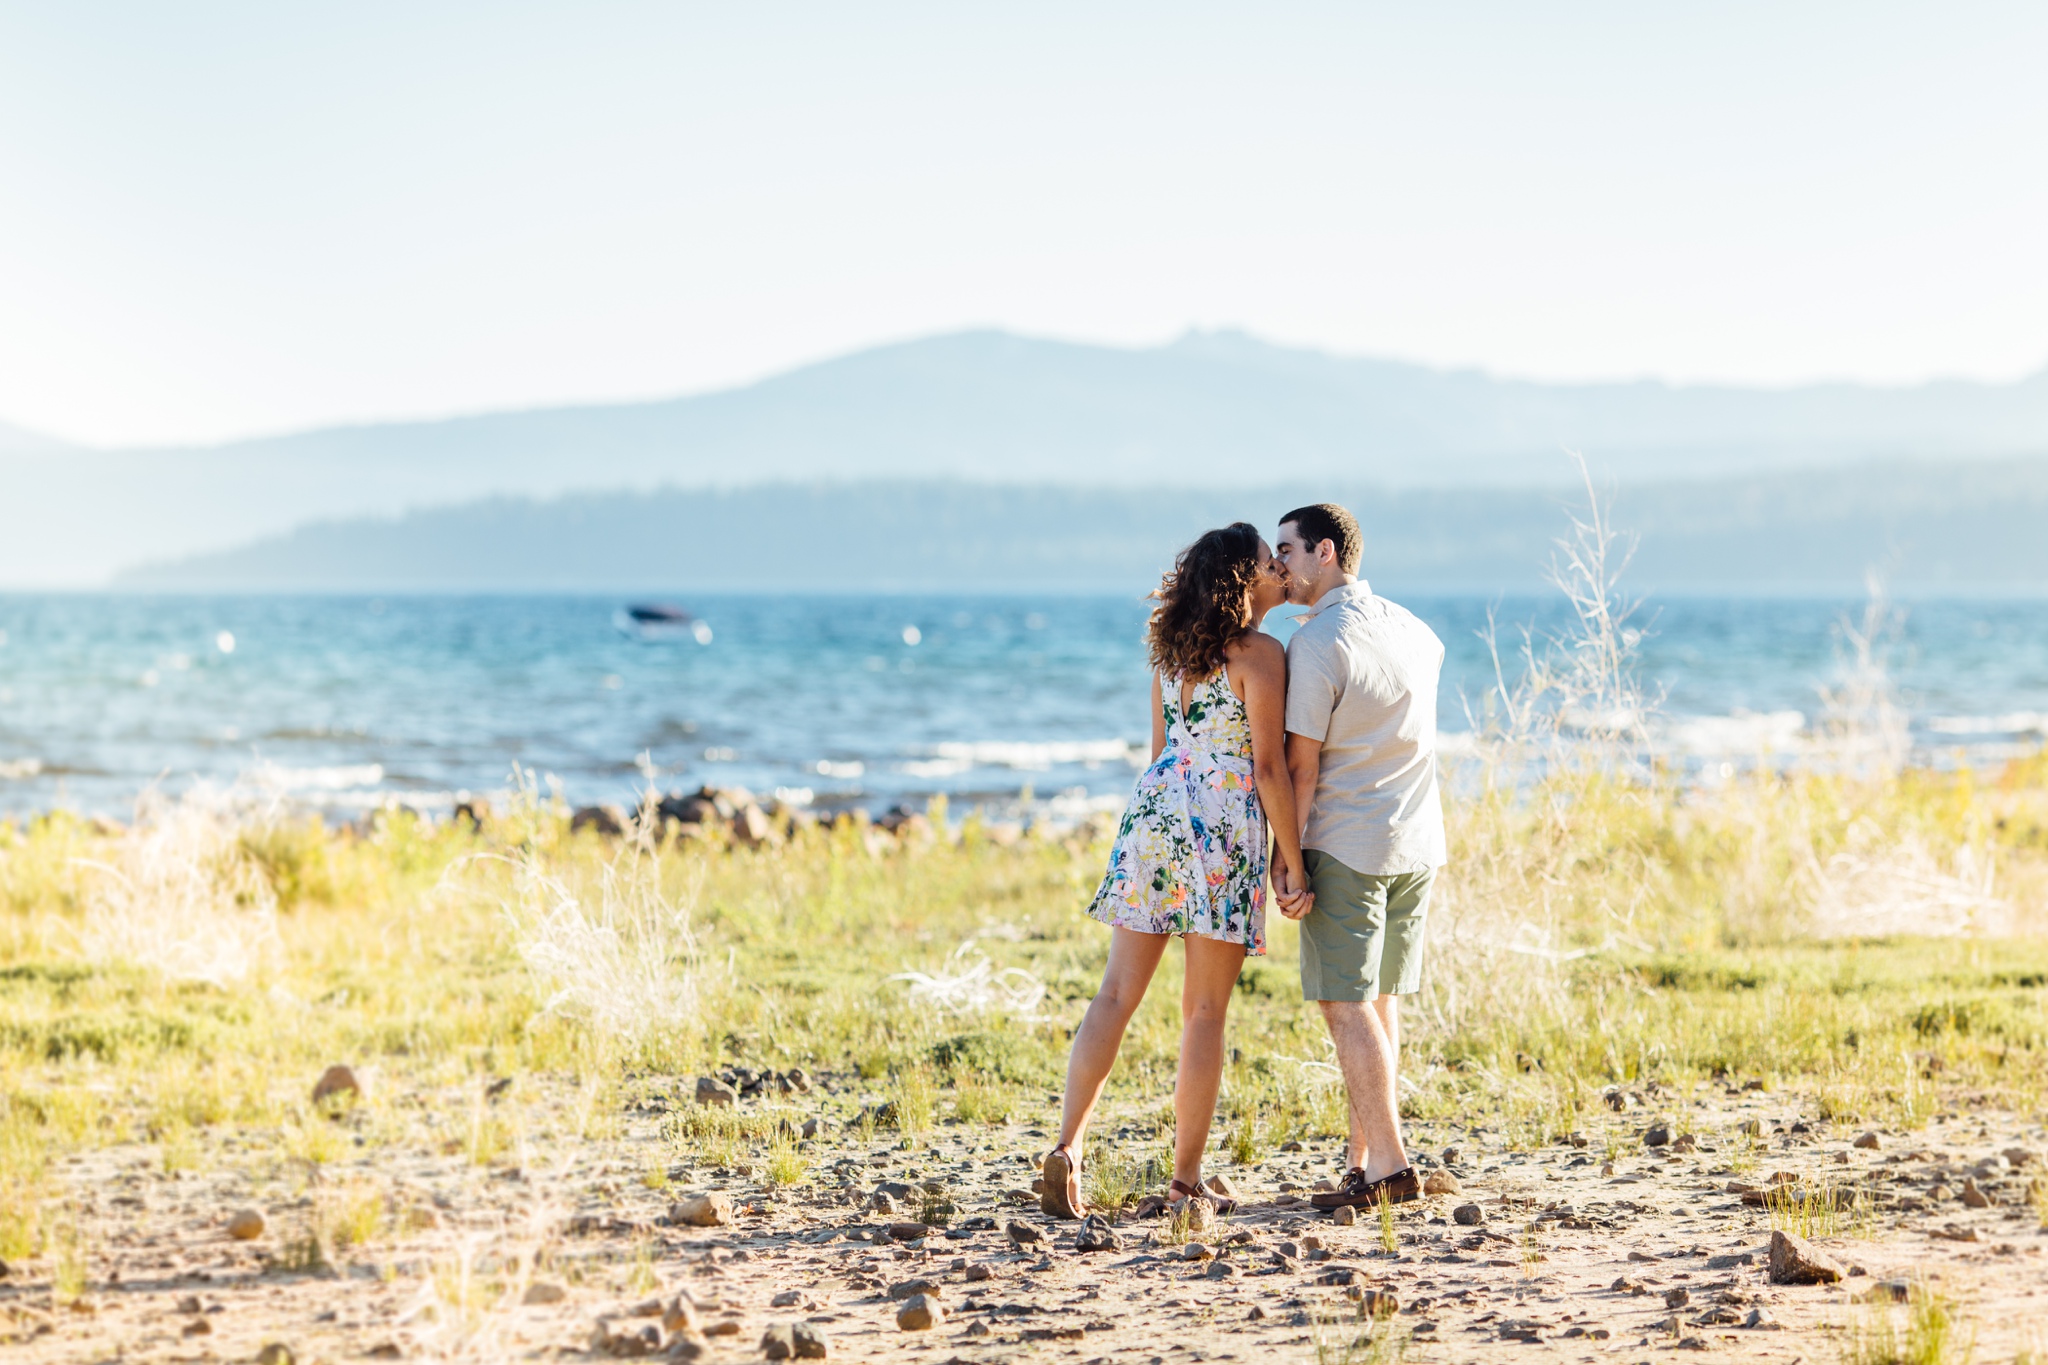 thedelauras_ostaraphotography_laketahoeengagement_laketahoeweddingphotograph_laketahoe_photographer_015